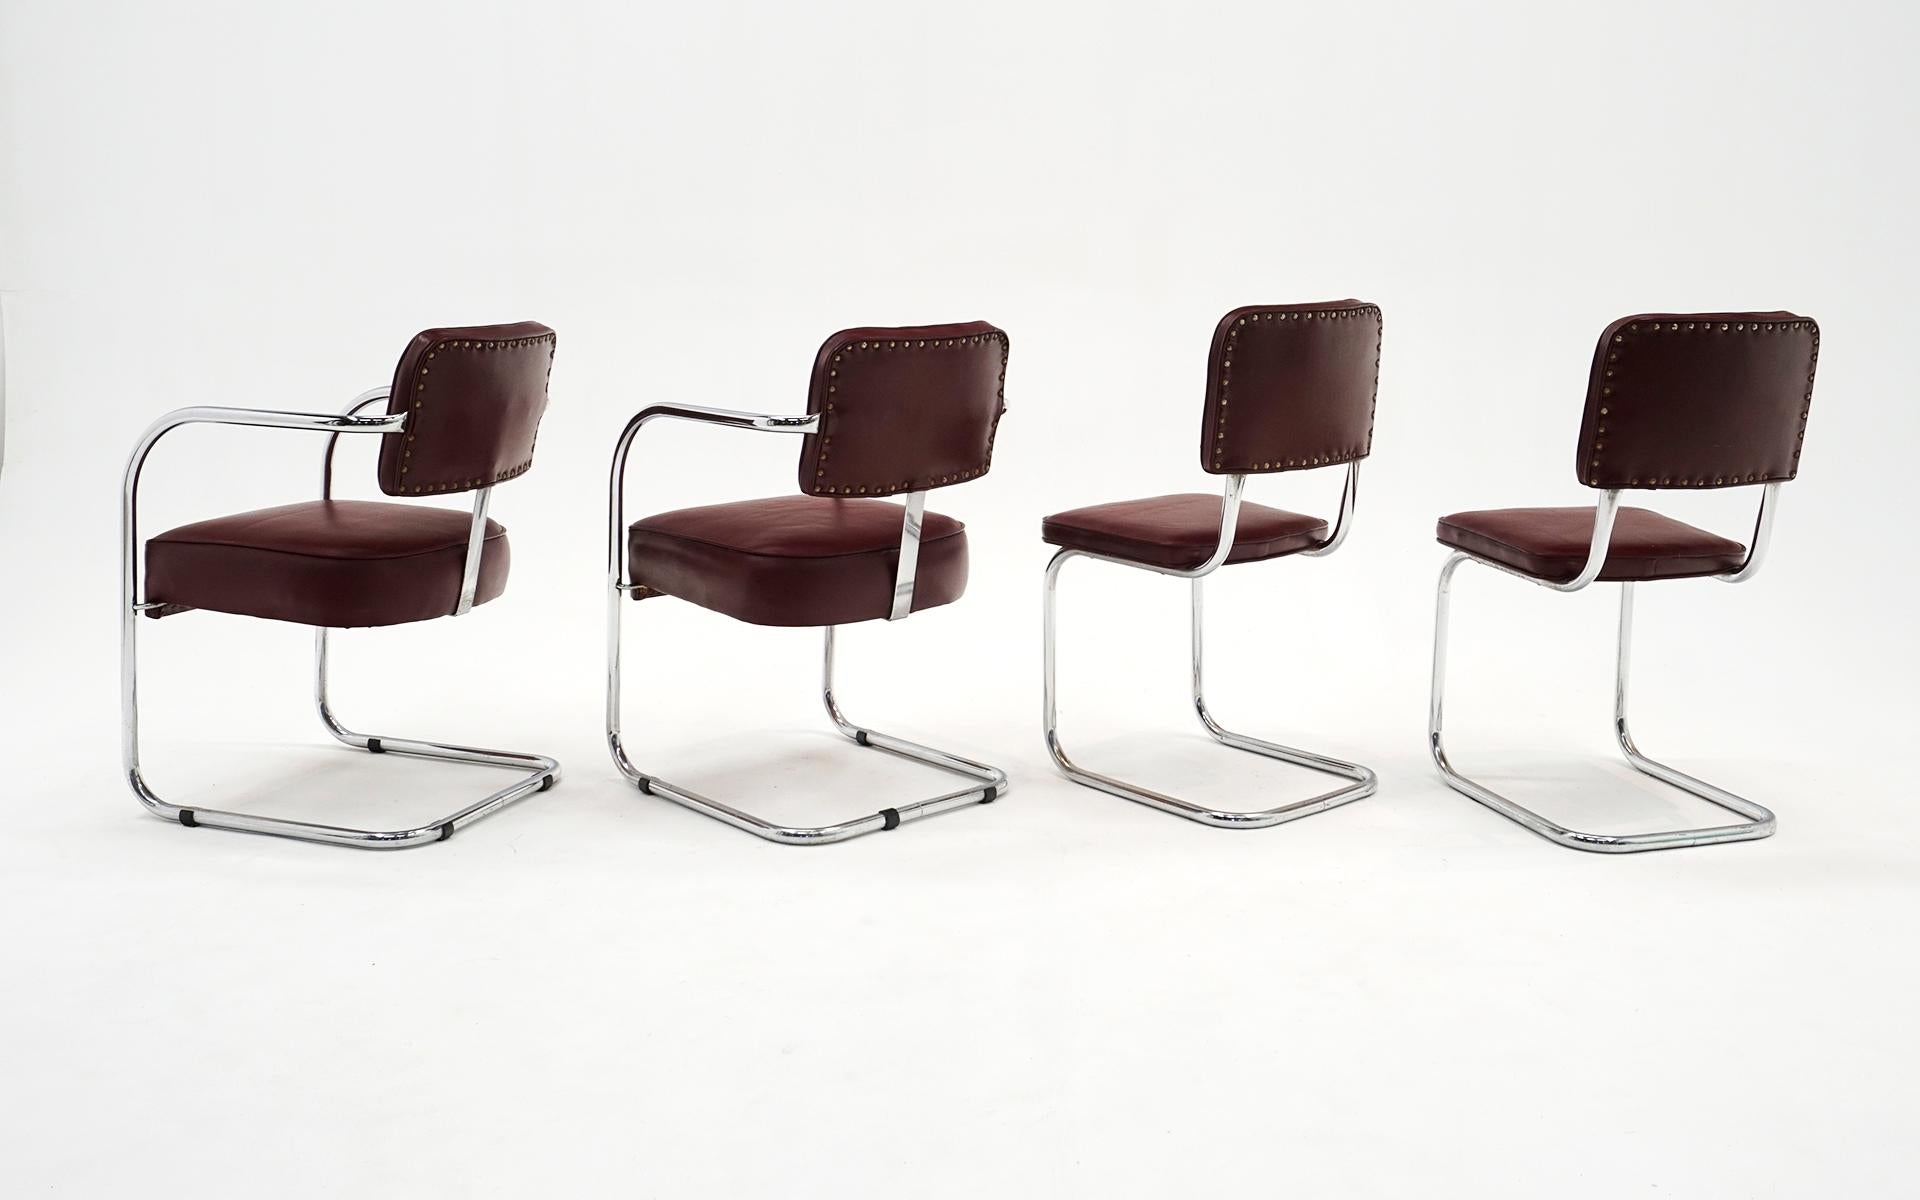 American Set of Four 1940s Tubular Chrome Chairs in Original Oxblood Leather like Vinyl For Sale